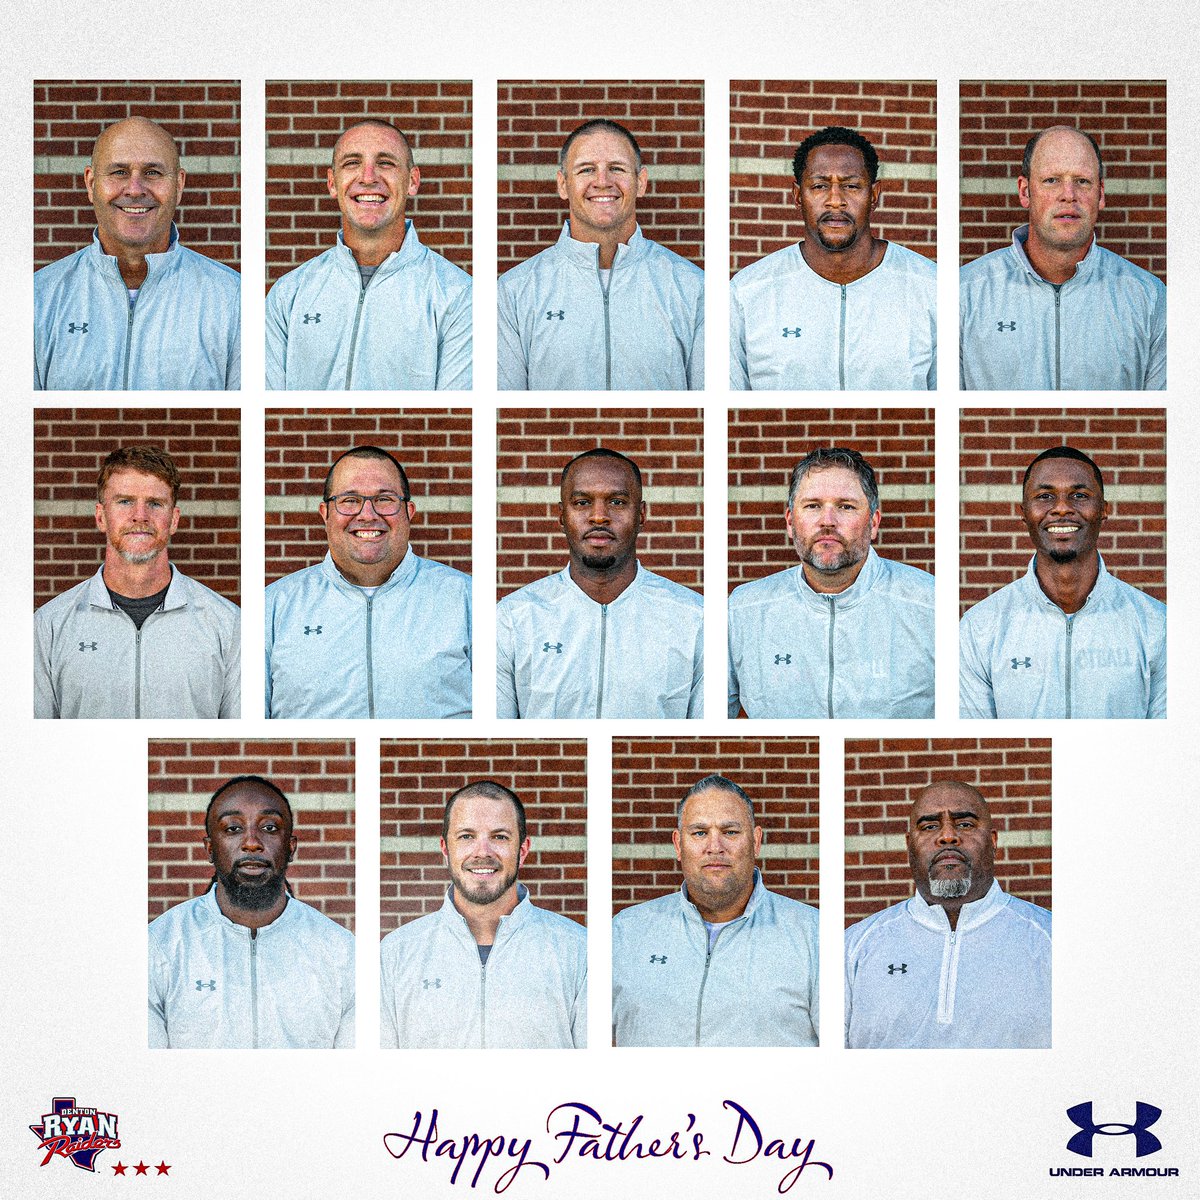 Happy Father's Day!!! Thank you for being father figures to your own children, but also to our Ryan players. Our program is lucky to have leaders like you! Wishing you all a wonderful day! 

#ItTakesAVillage 
#HappyFathersDay #HomeOfChampions